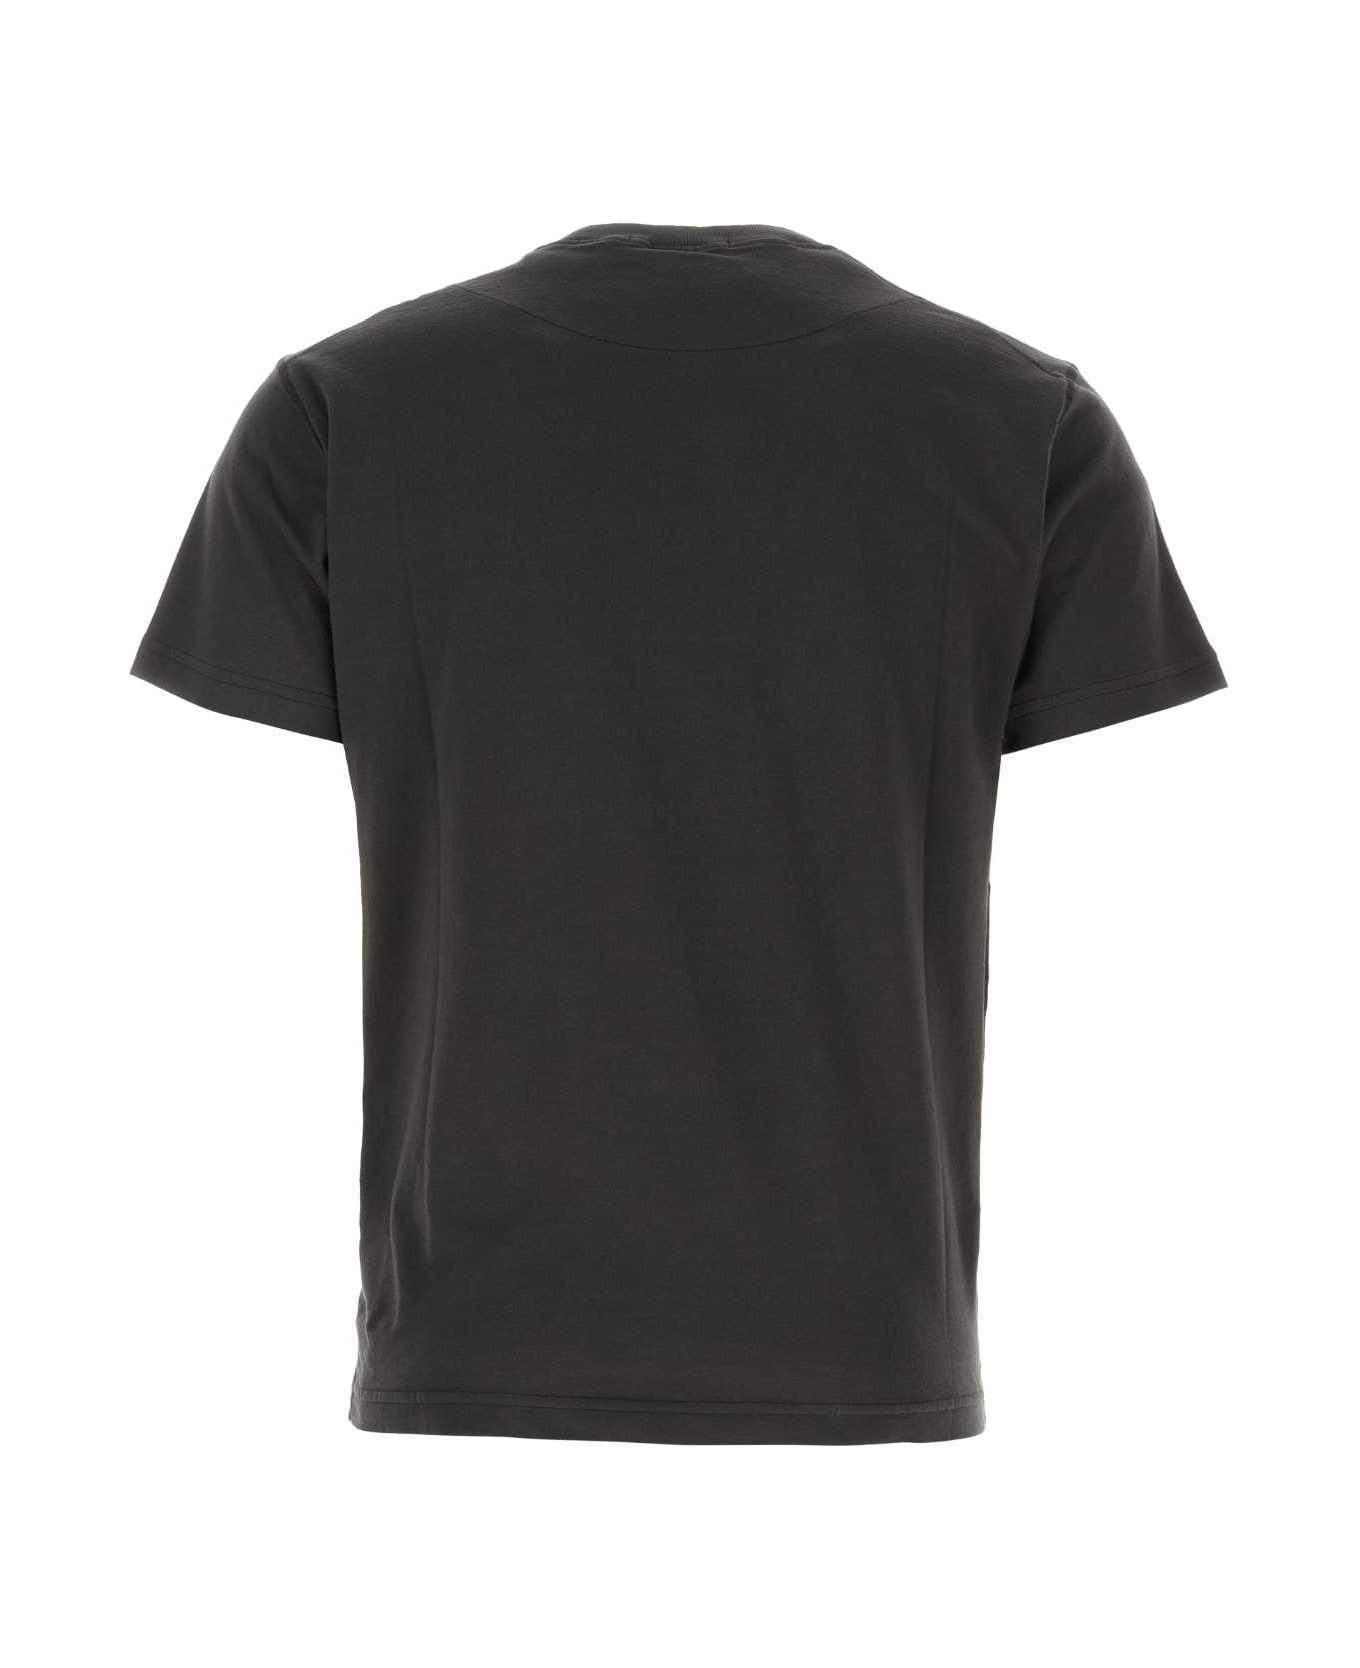 Stone Island Anthracite Cotton T-shirt - CHARCHOAL